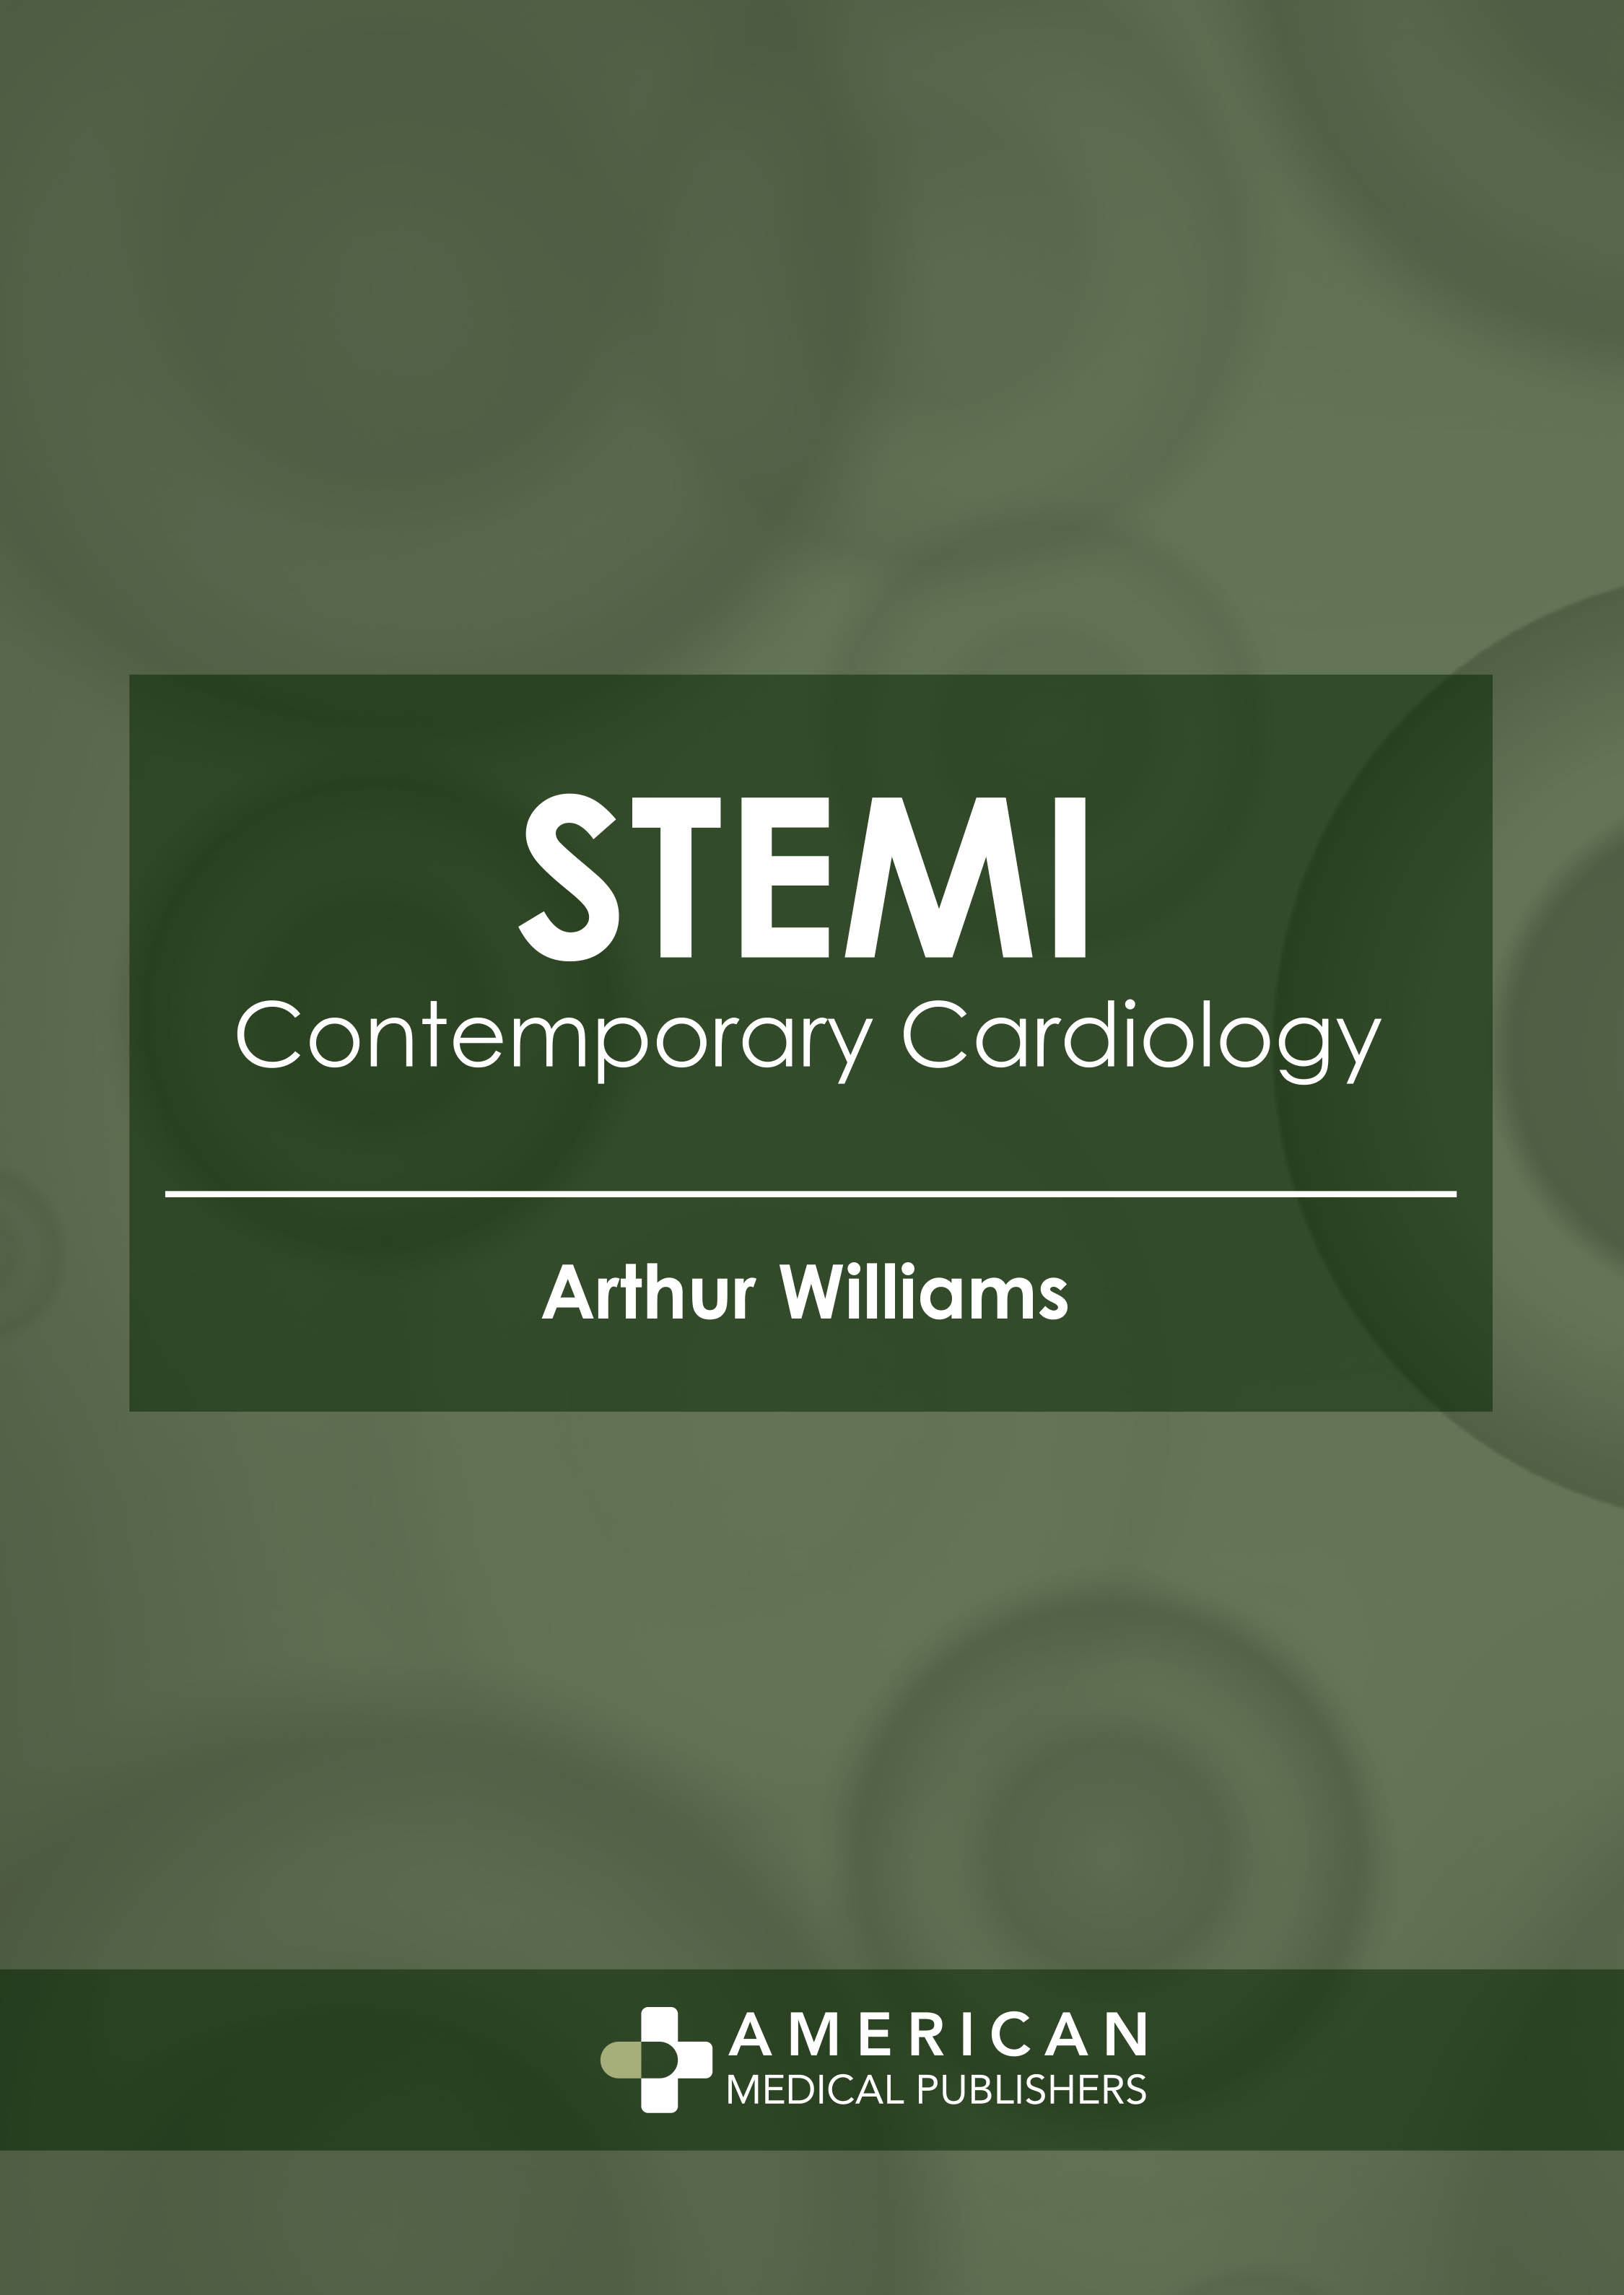 exclusive-publishers/american-medical-publishers/stemi-contemporary-cardiology-9781639270392